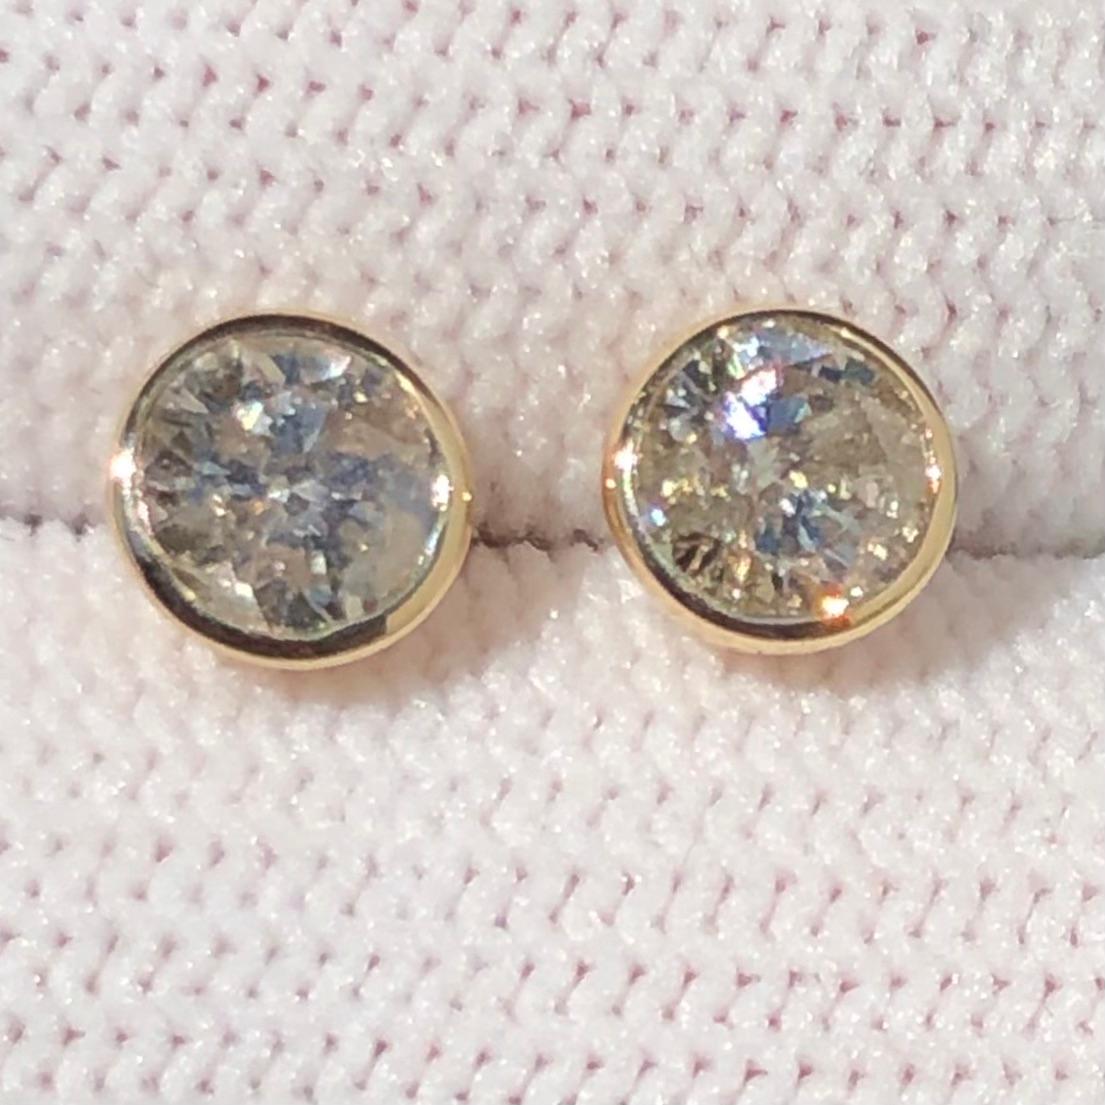 Stunning 1 1/2 Ct Round Solitaire Diamond Stud Earrings Bezel Set in 14K Yellow Gold. These natural diamond solitaire studs are certified with an appraisal report value of $7,470.00.

A large center solitaire diamond (size of an engagement ring) is